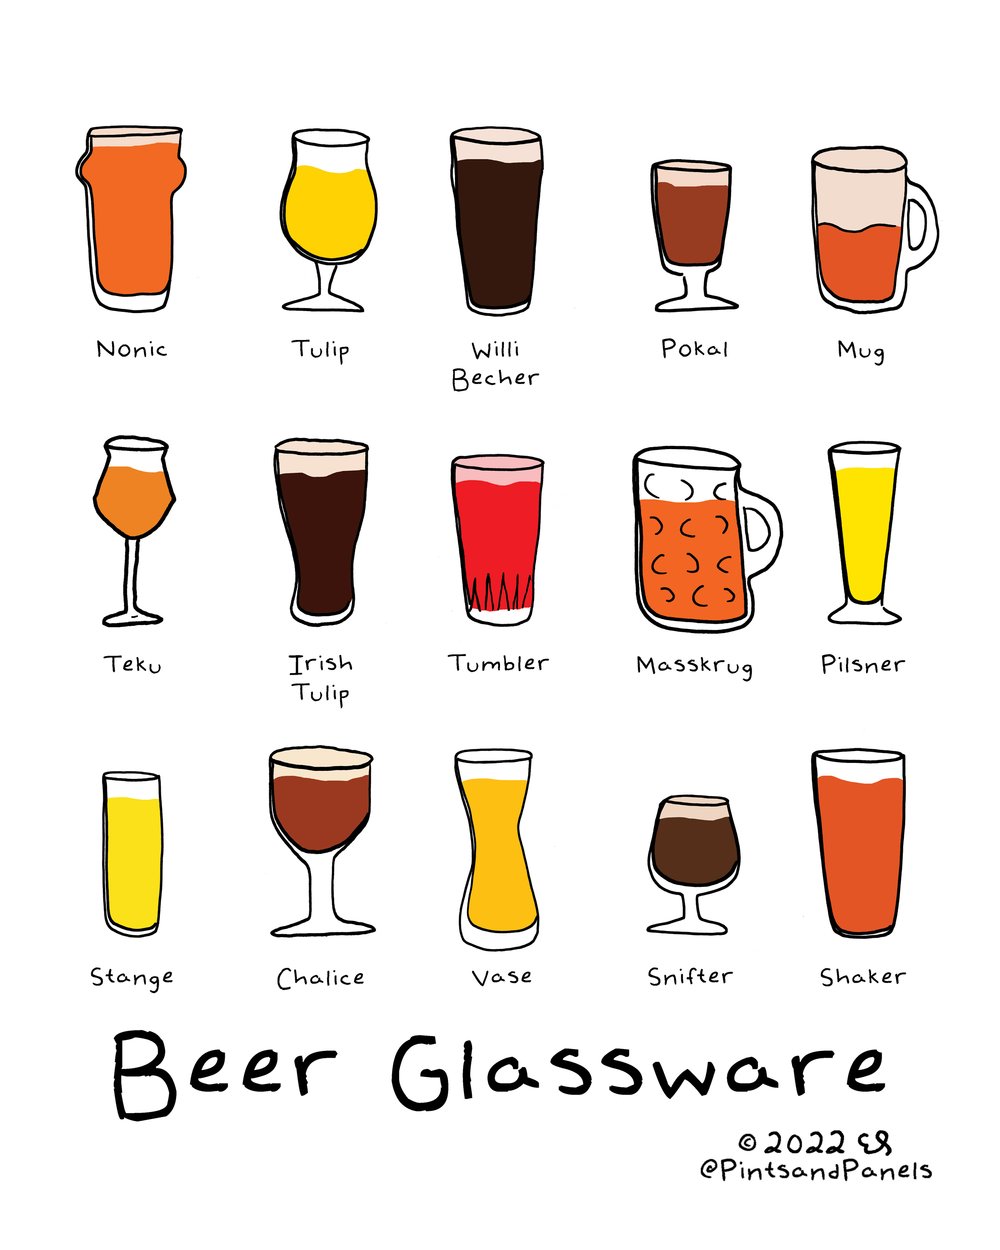 Glassware — Pints and